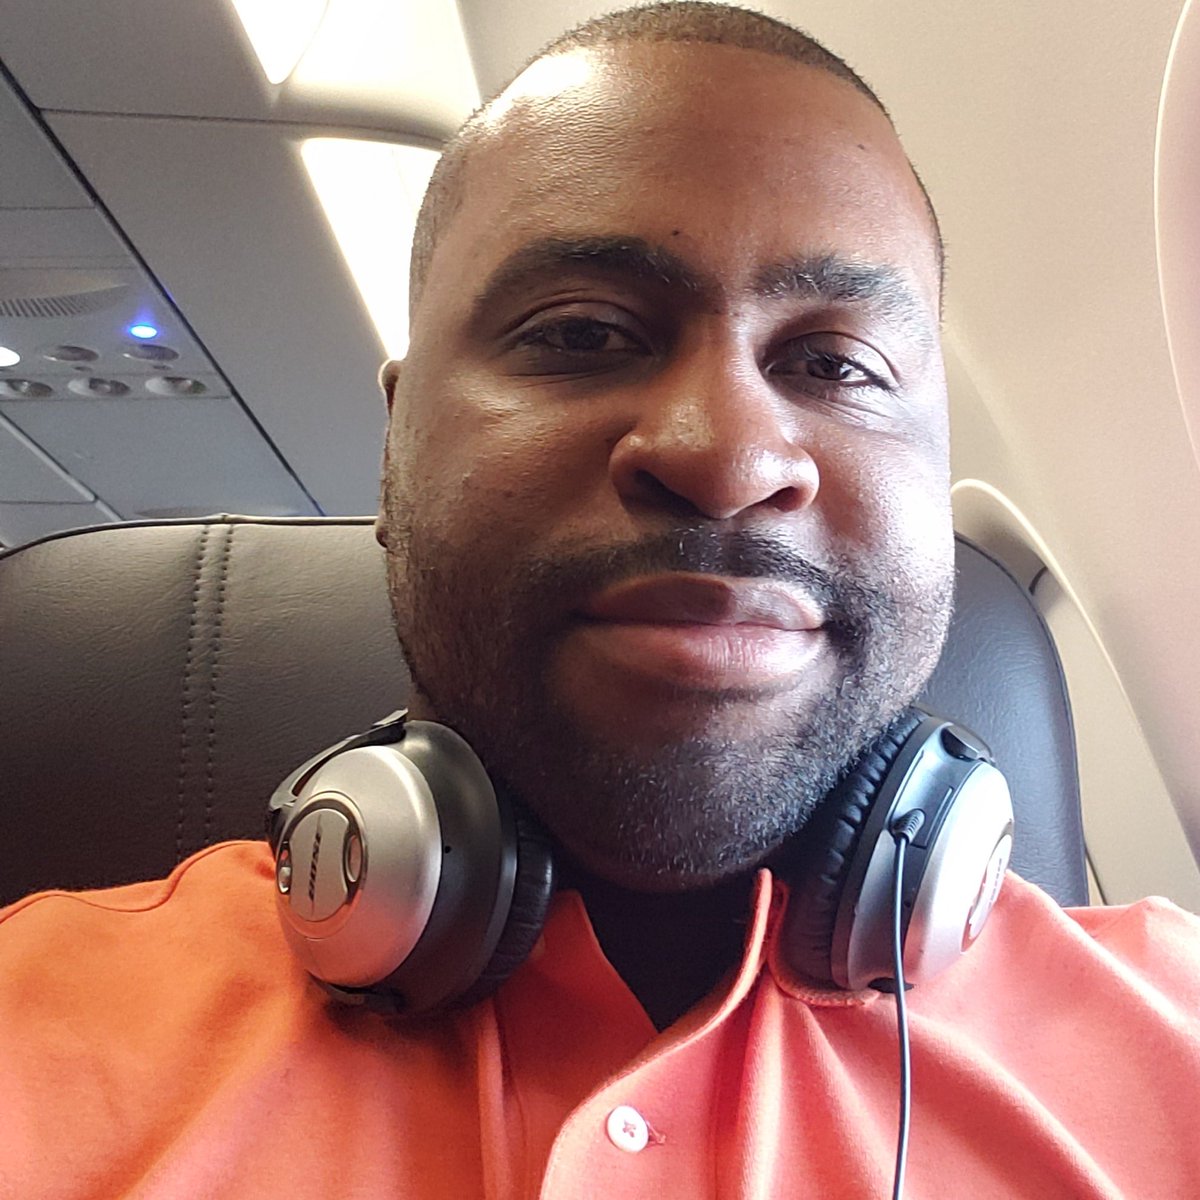 It's time to live life in the sky again. I'm on my way to Chicago as part of my connection to Wyoming USA. Taking off from Miami International Airport in Miami, FL  #jetlife_777 #lifeinthesky #doubletap #traveler #explorer